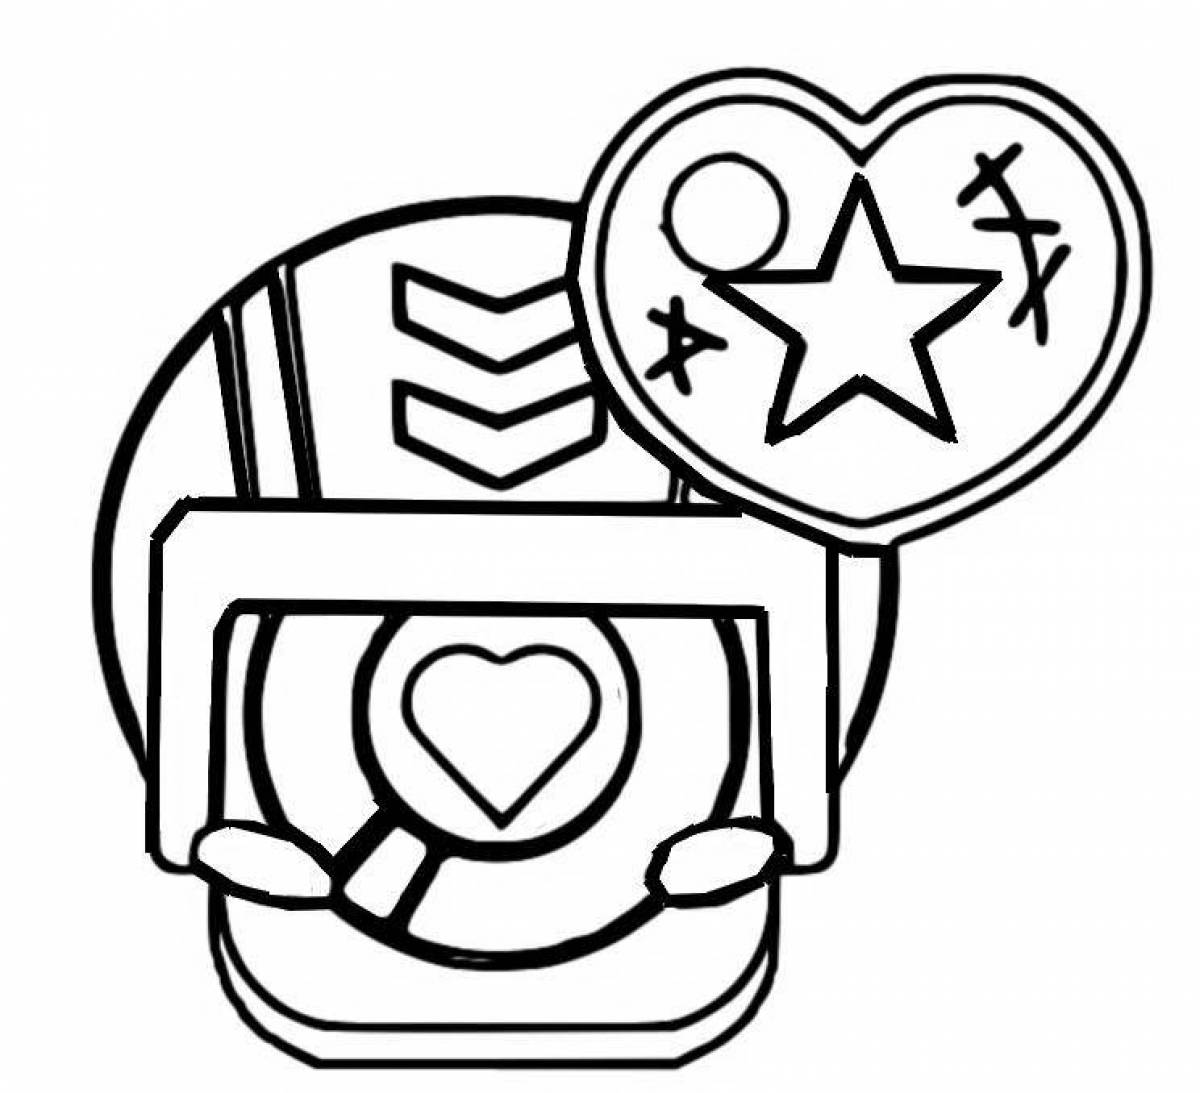 Improved brawl stars pins coloring page